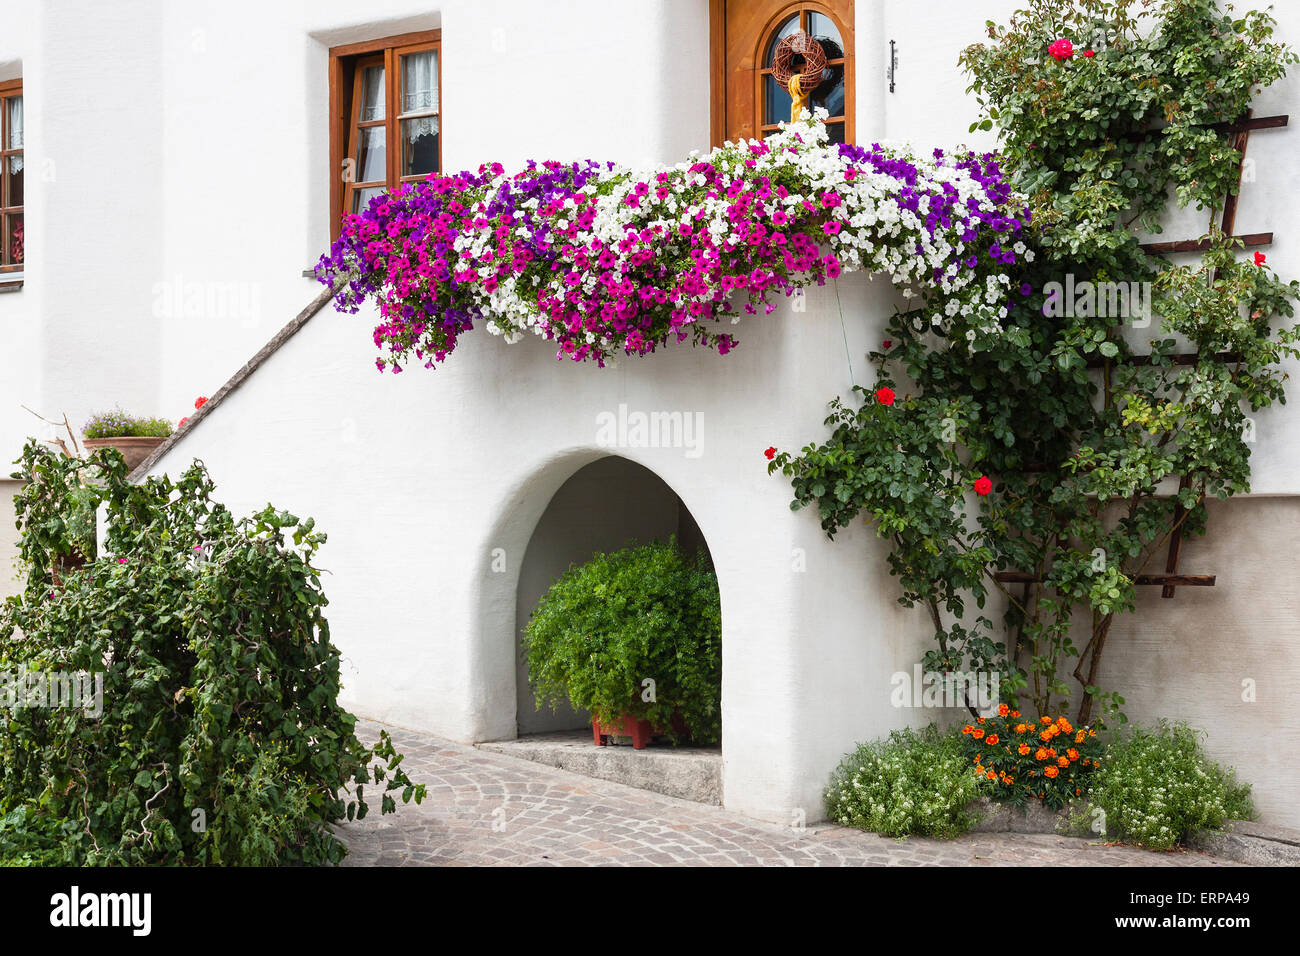 Ornaments and flowers at a village house in Jerzens in the Pitztal, Austria Stock Photo